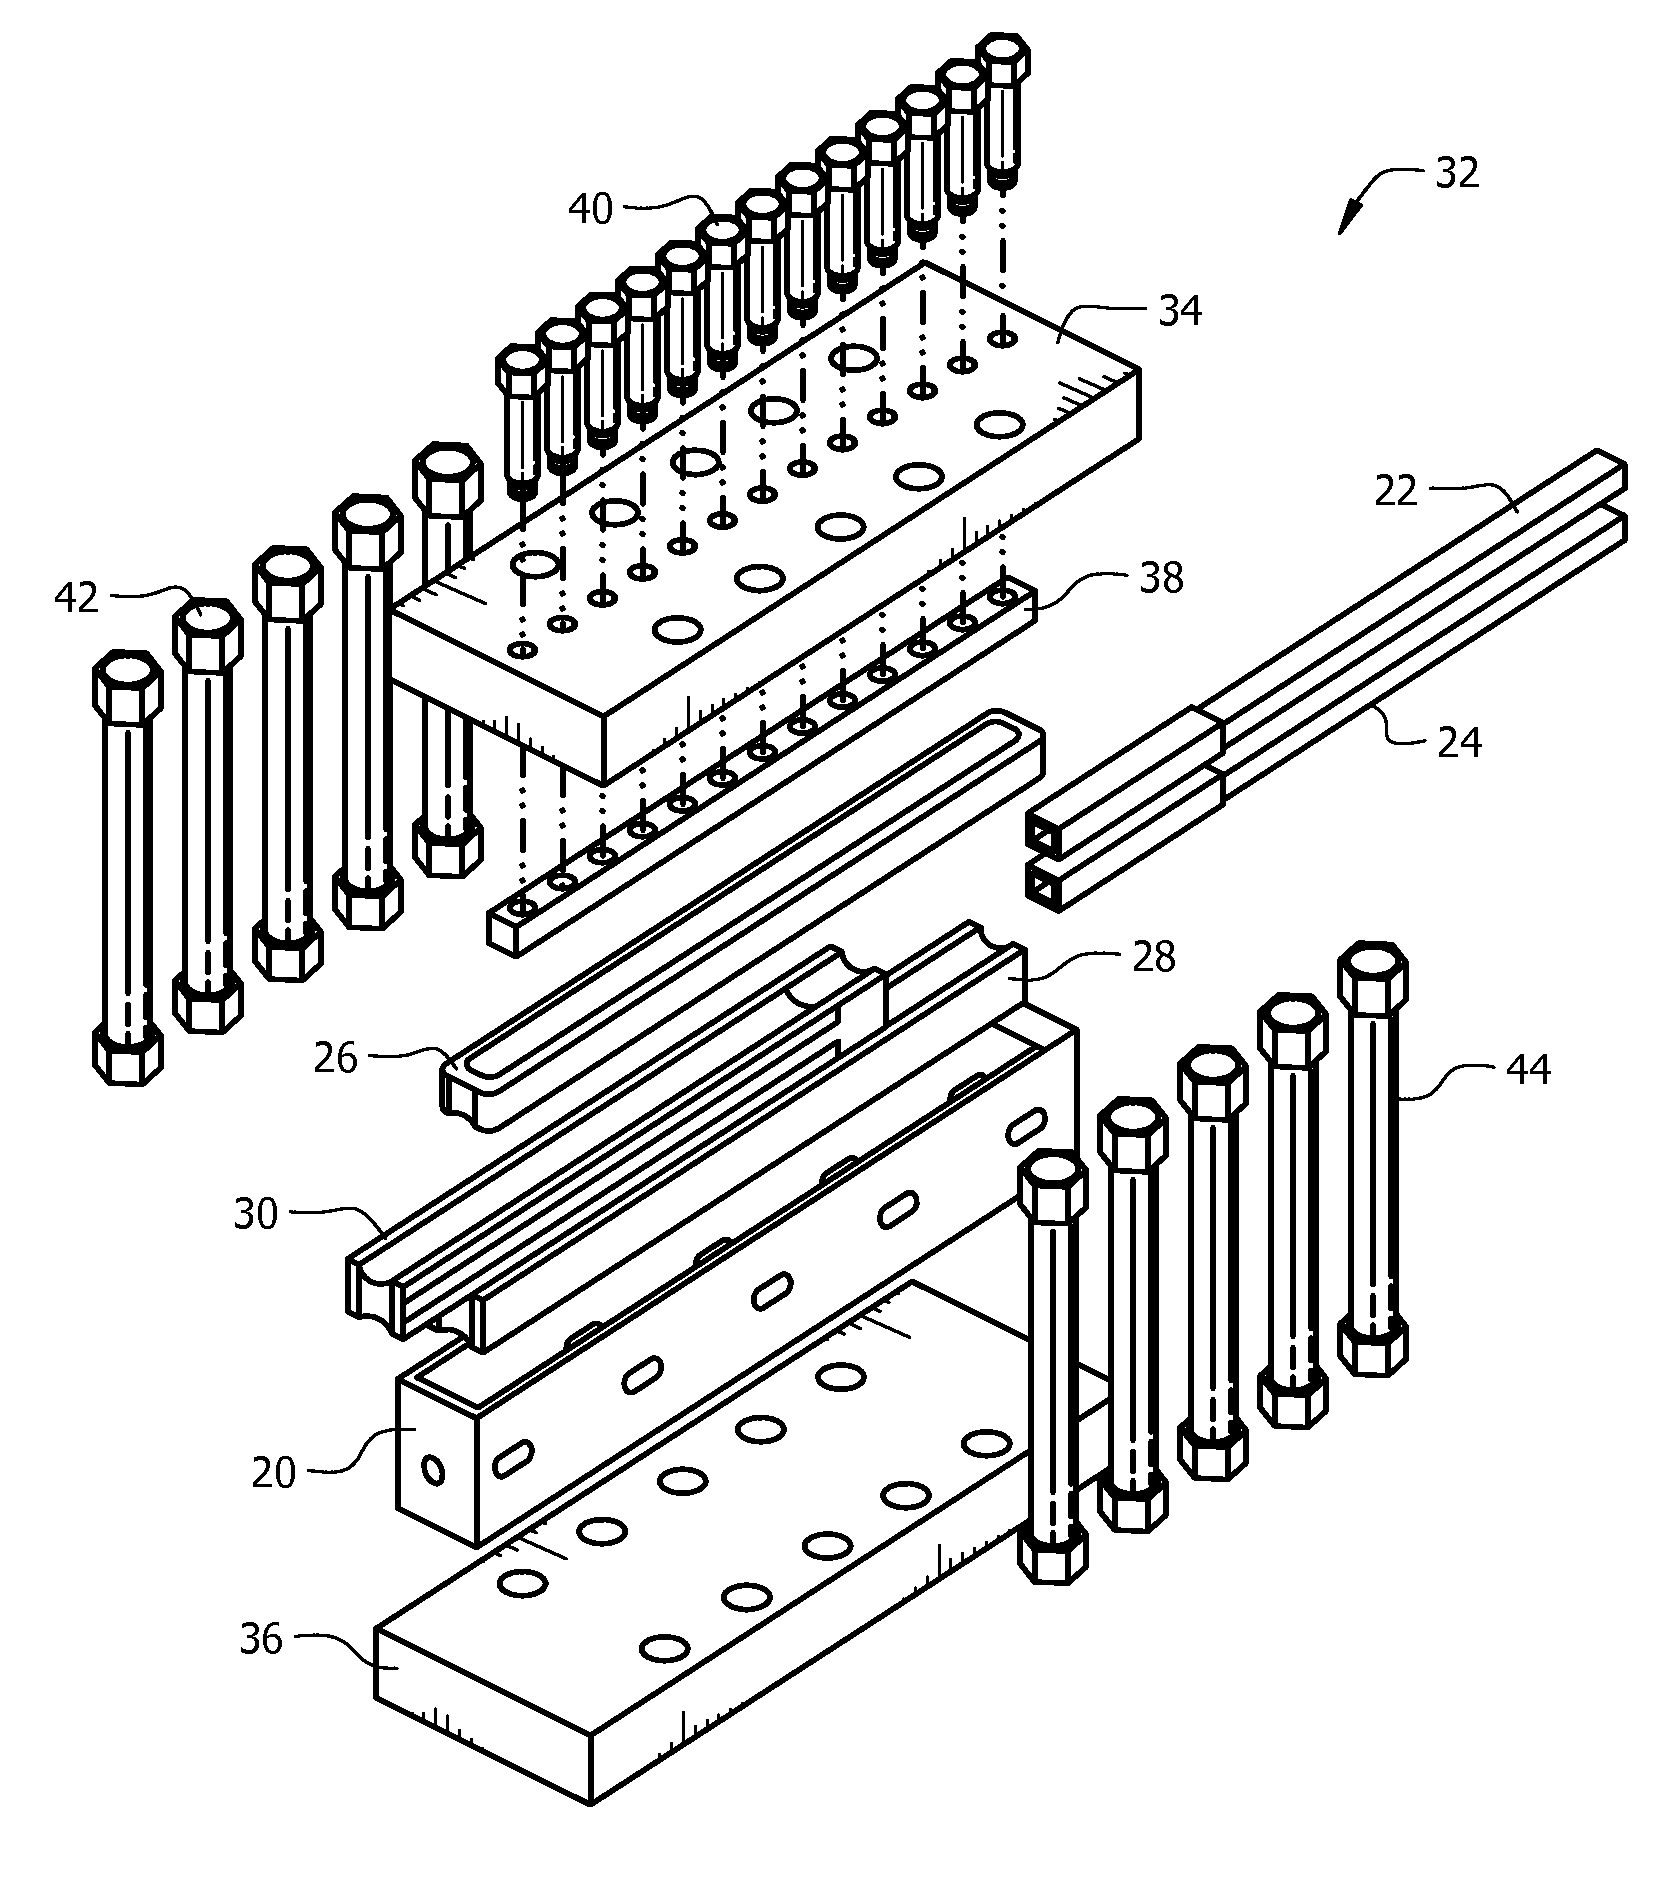 Solderless cable-in-conduit-conductor (CICC) joint